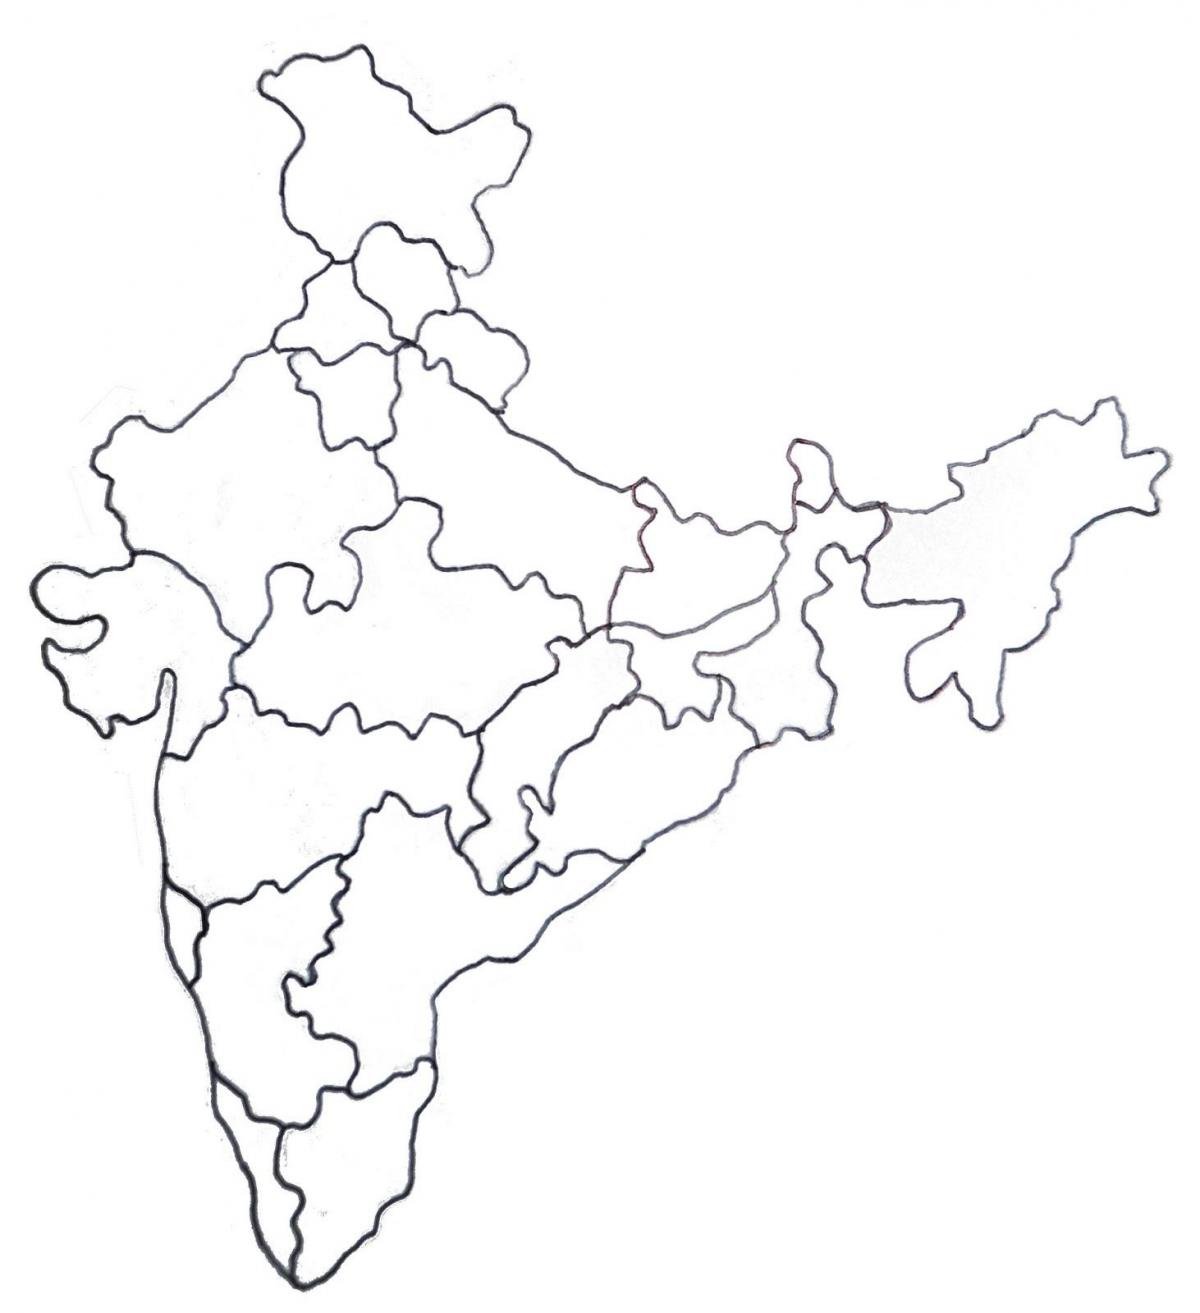 India map drawing images